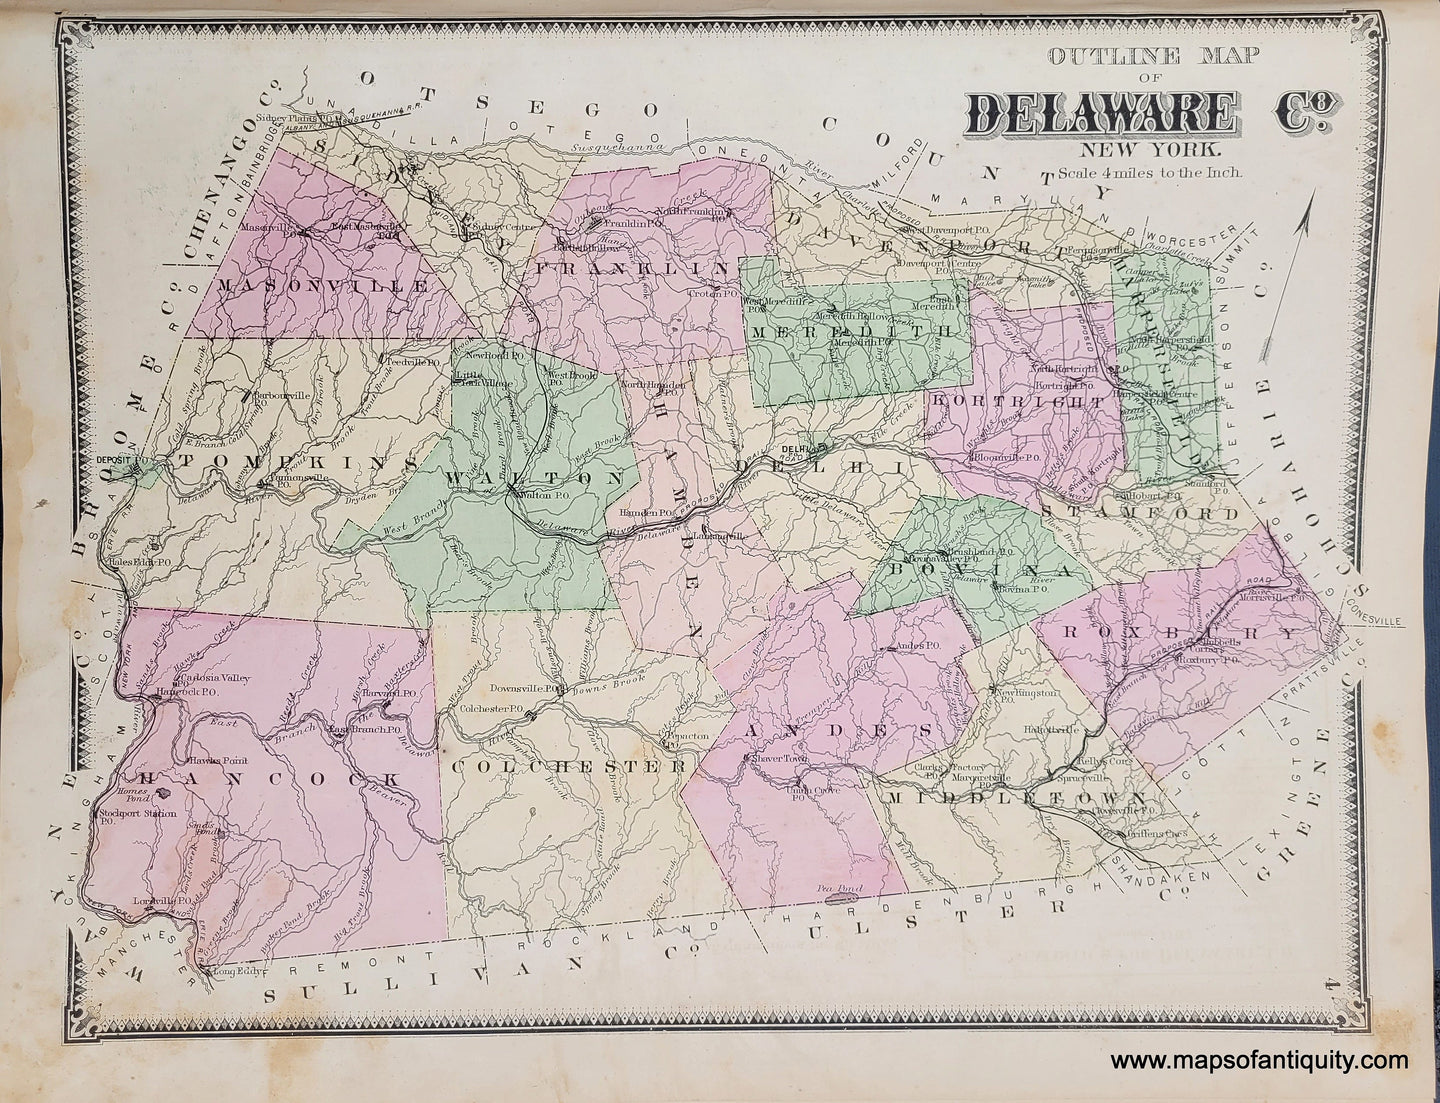 Genuine-Antique-Map-Outline-Map-of-Delaware-Co-New-York-1869-Beers-Ellis-Soule-Maps-Of-Antiquity